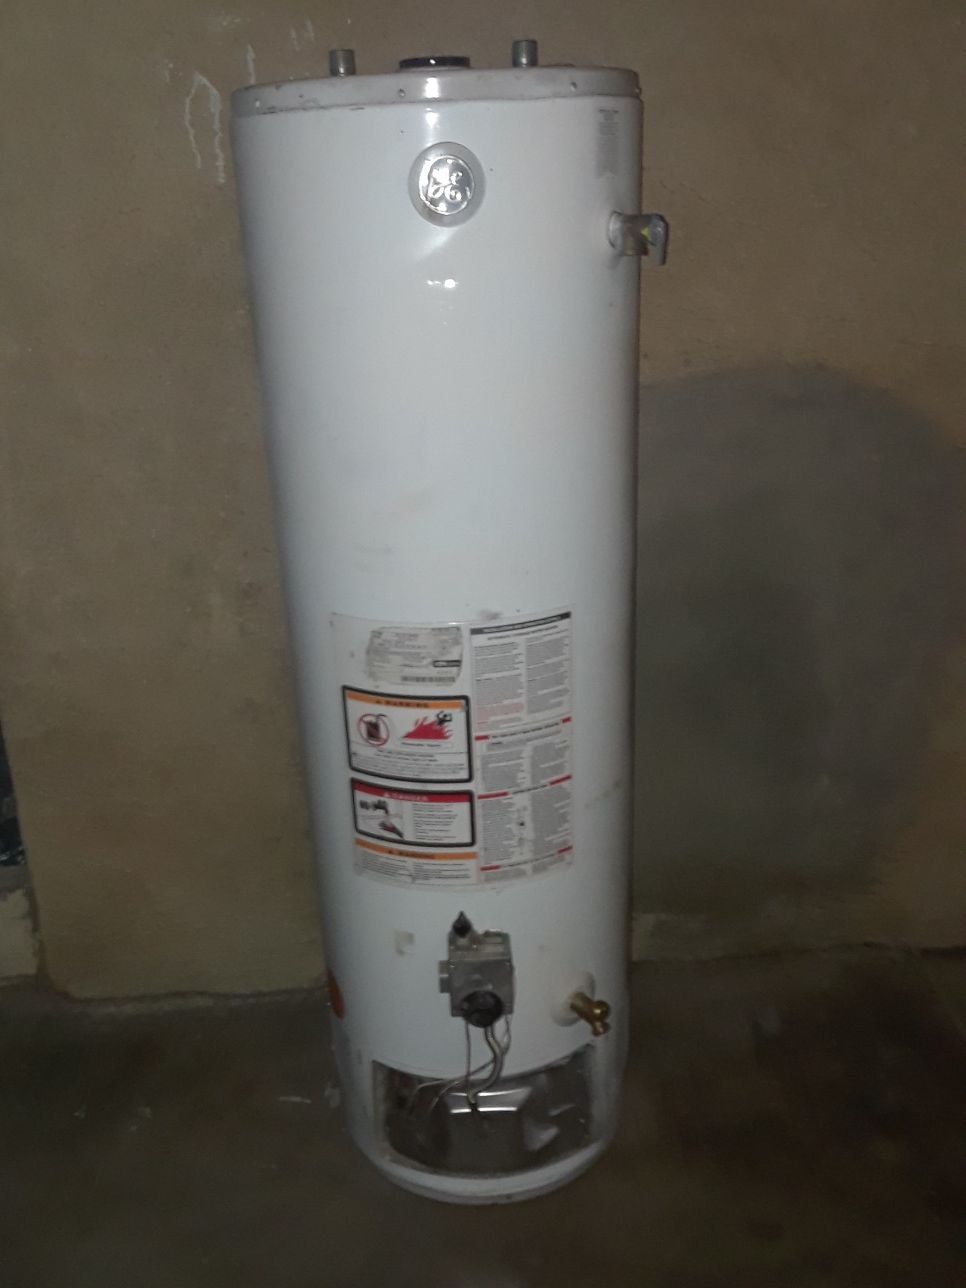 Tiger Hot Water Dispenser for Sale in San Dimas, CA - OfferUp